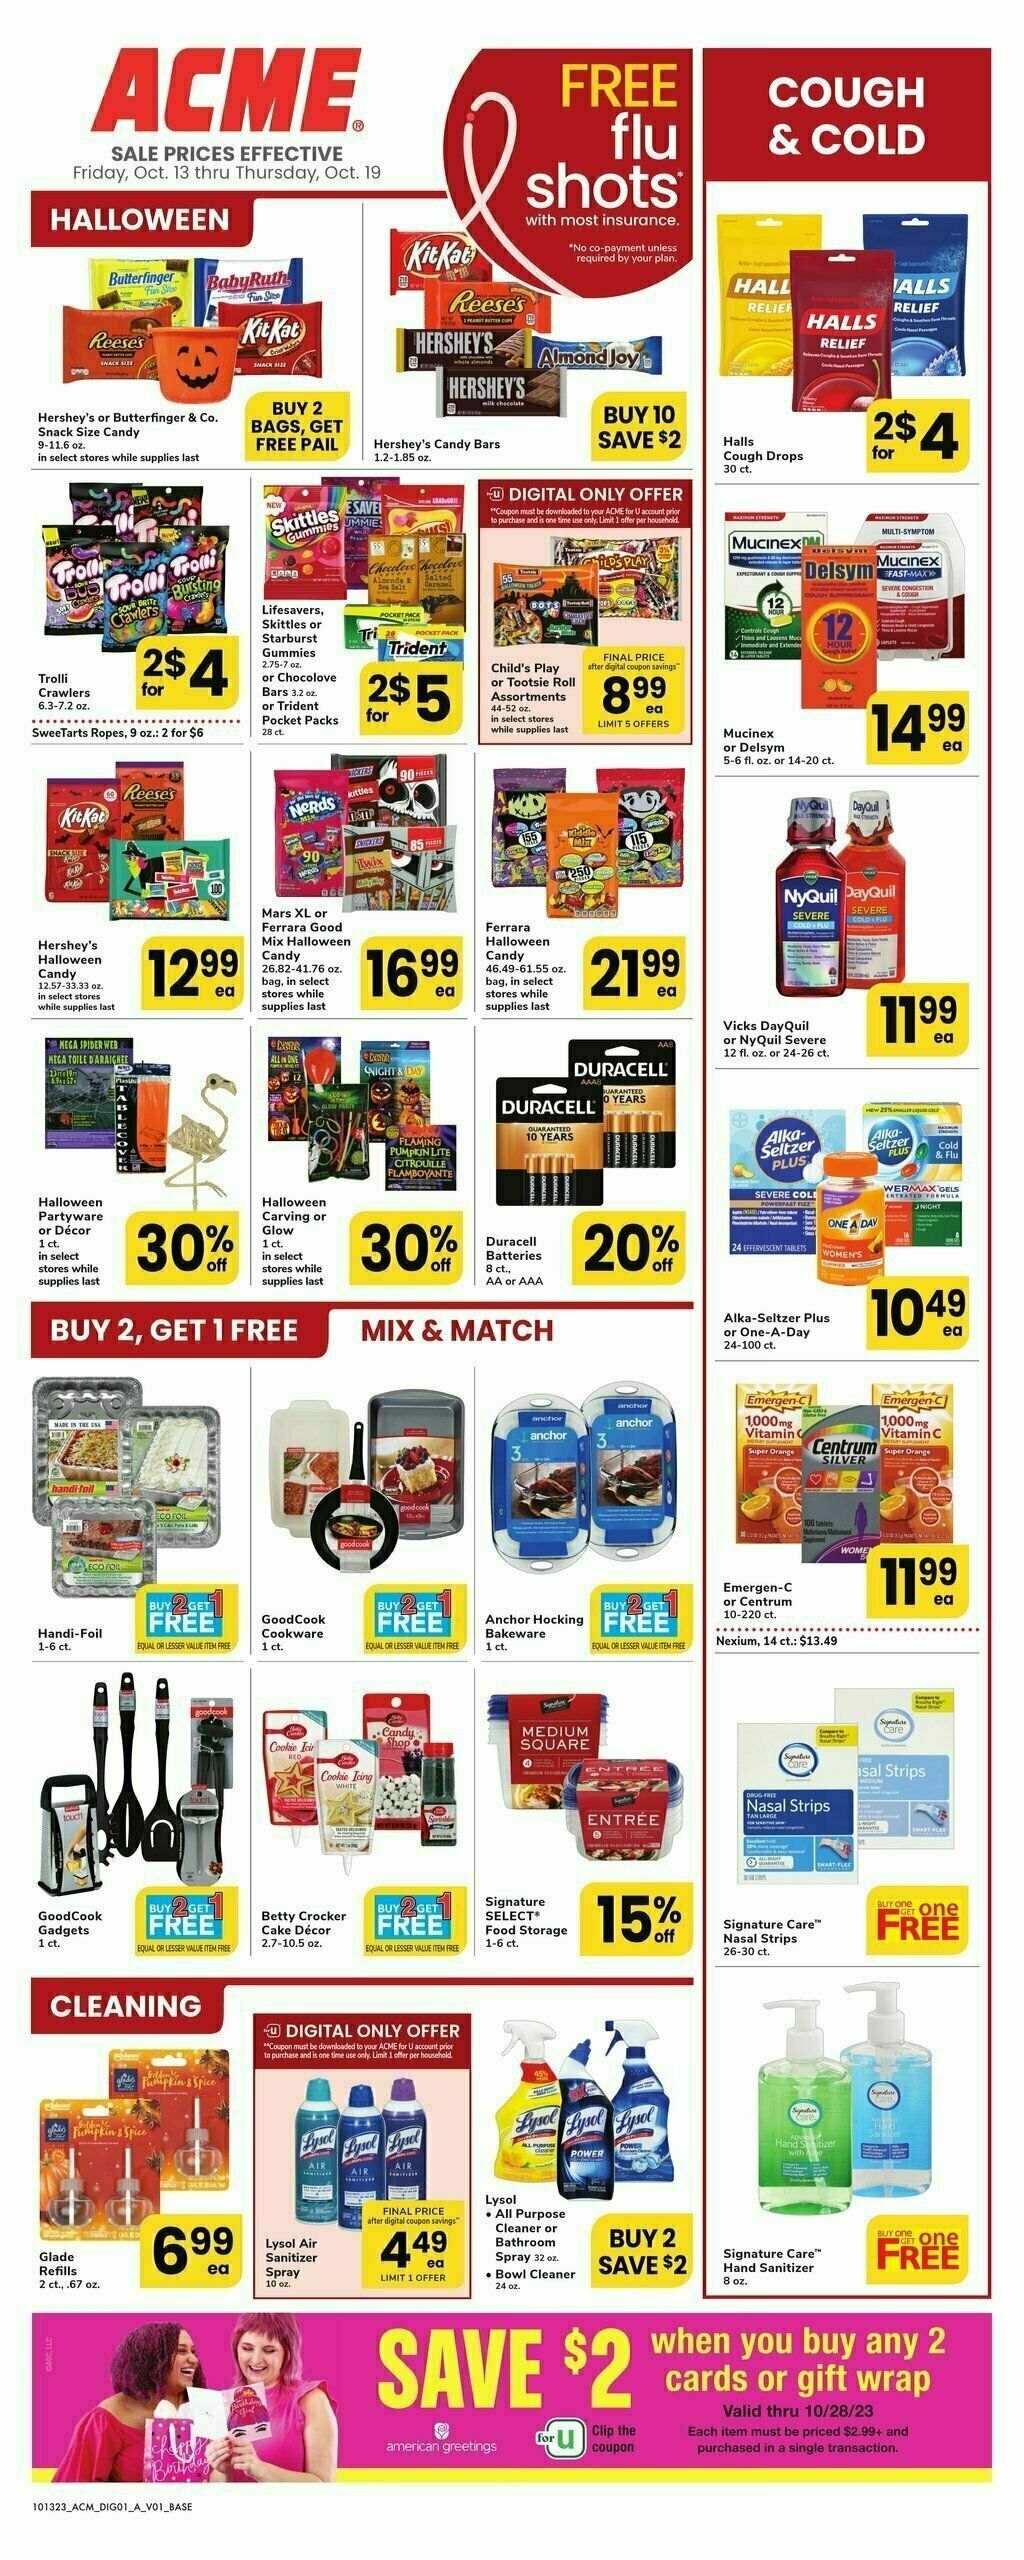 ACME Markets Health, Home & Beauty Weekly Ad from October 13